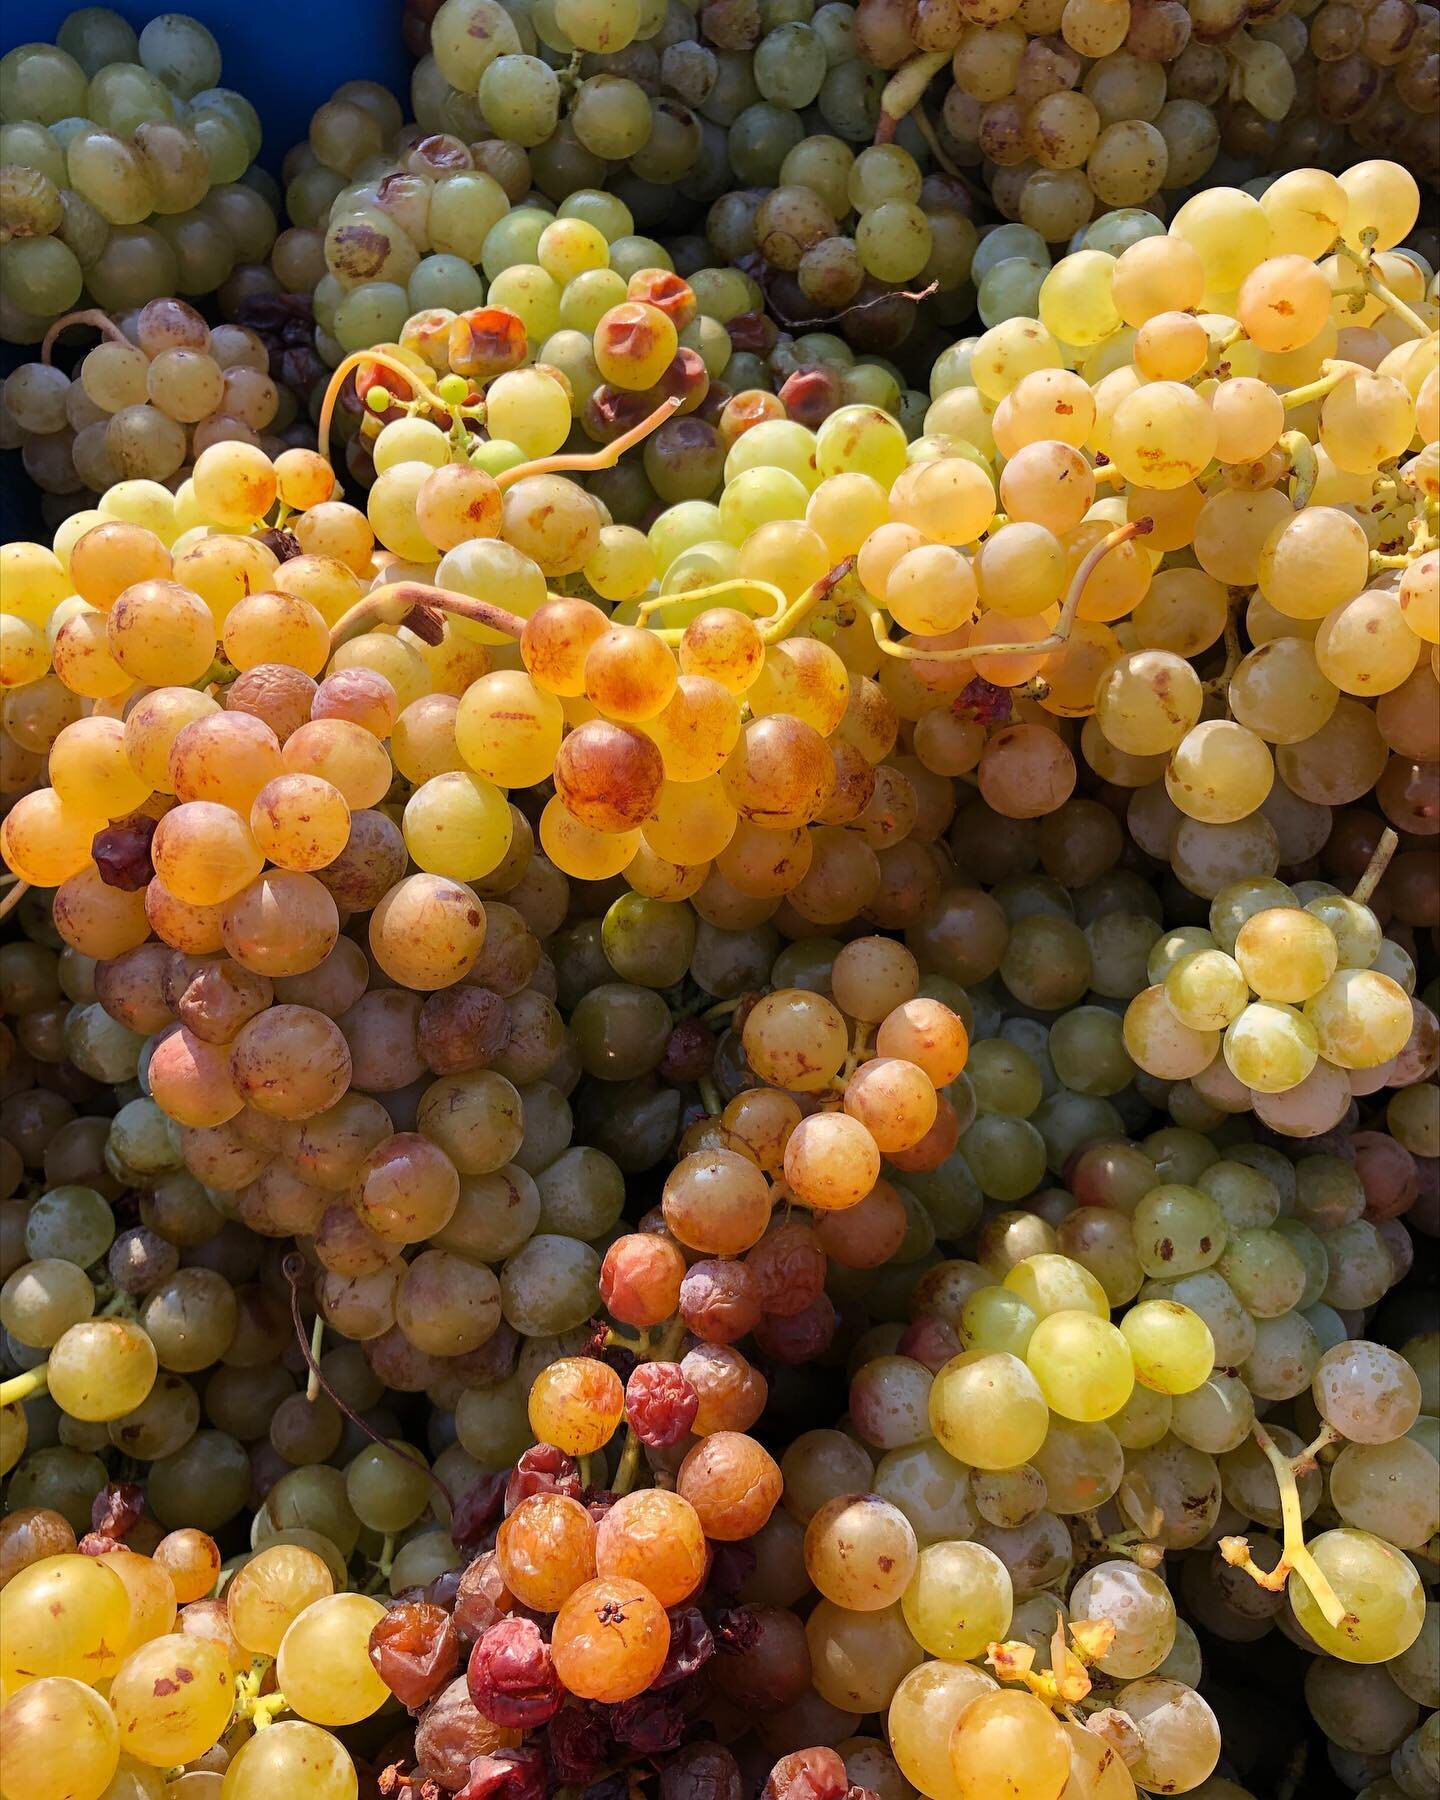 These just in: harvest pictures from our man @gezalenkey at @lenkeypinceszet in M&aacute;d, Tokaj. I was really concerned about this vintage after reports of an extremely dry and hot summer from all around Hungary. But it appears to be a beautiful vi